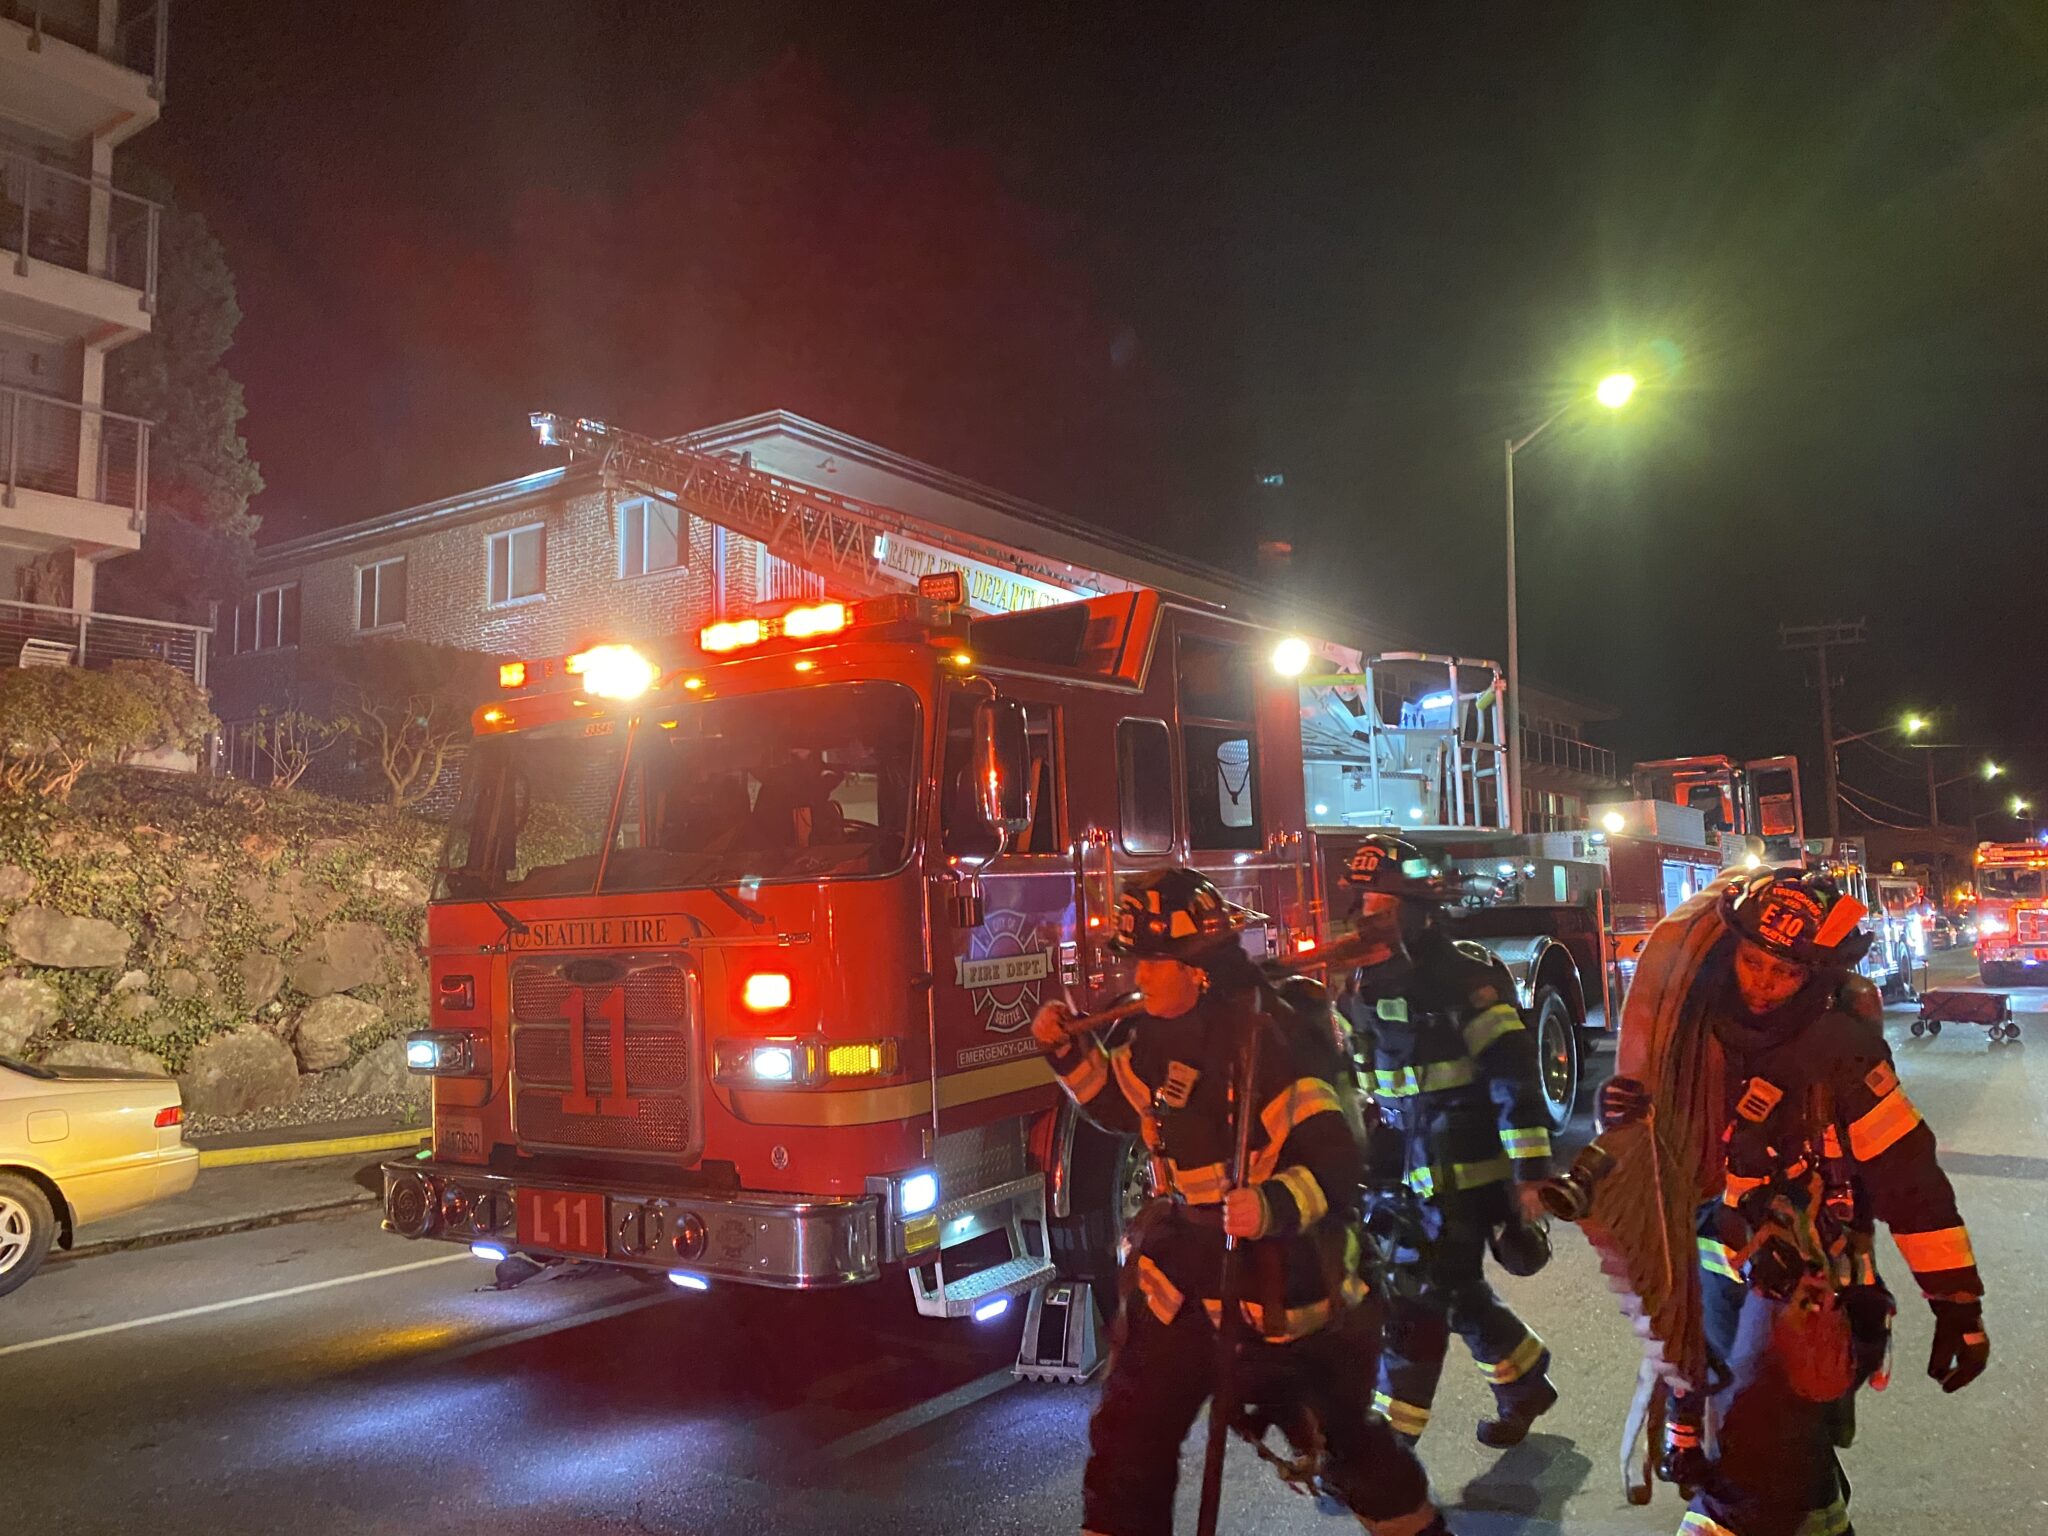 Firefighters responding to a food-on-stove fire that extended to the kitchen of a basement unit within an apartment building.